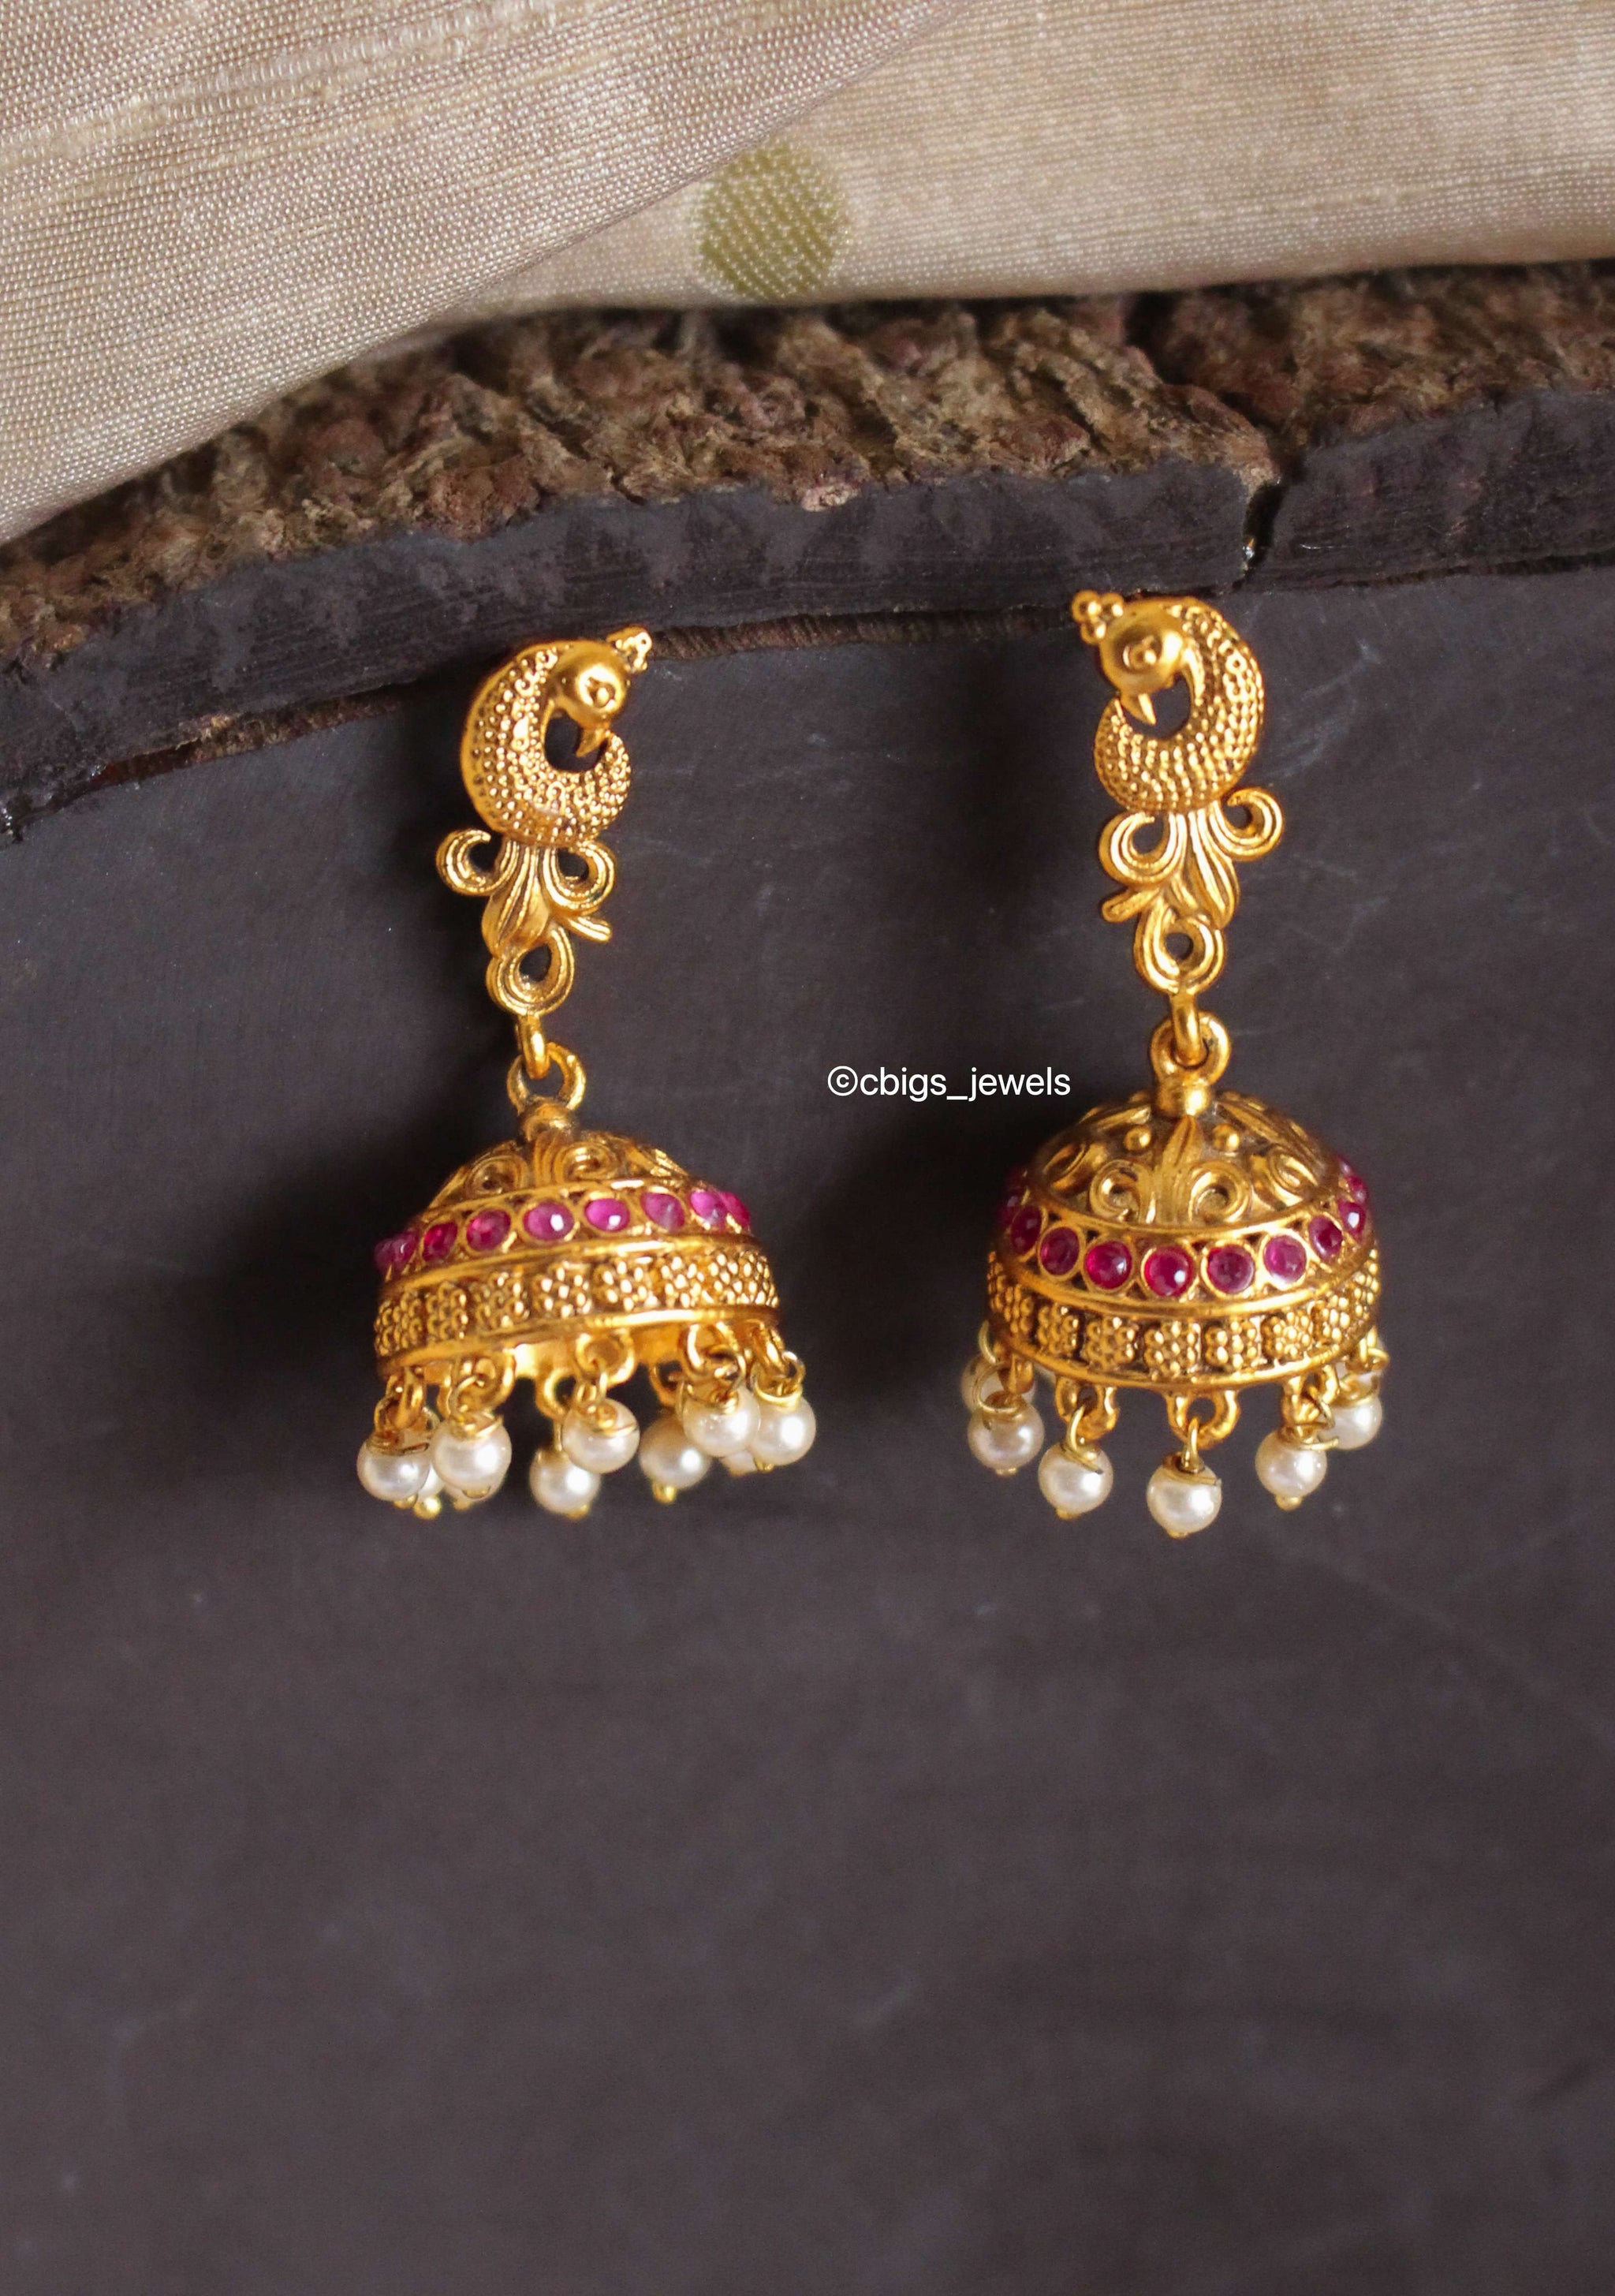 Source Top Selling Products Light Weight Simple Gold Earring Designs for  Women on m.alibaba.com